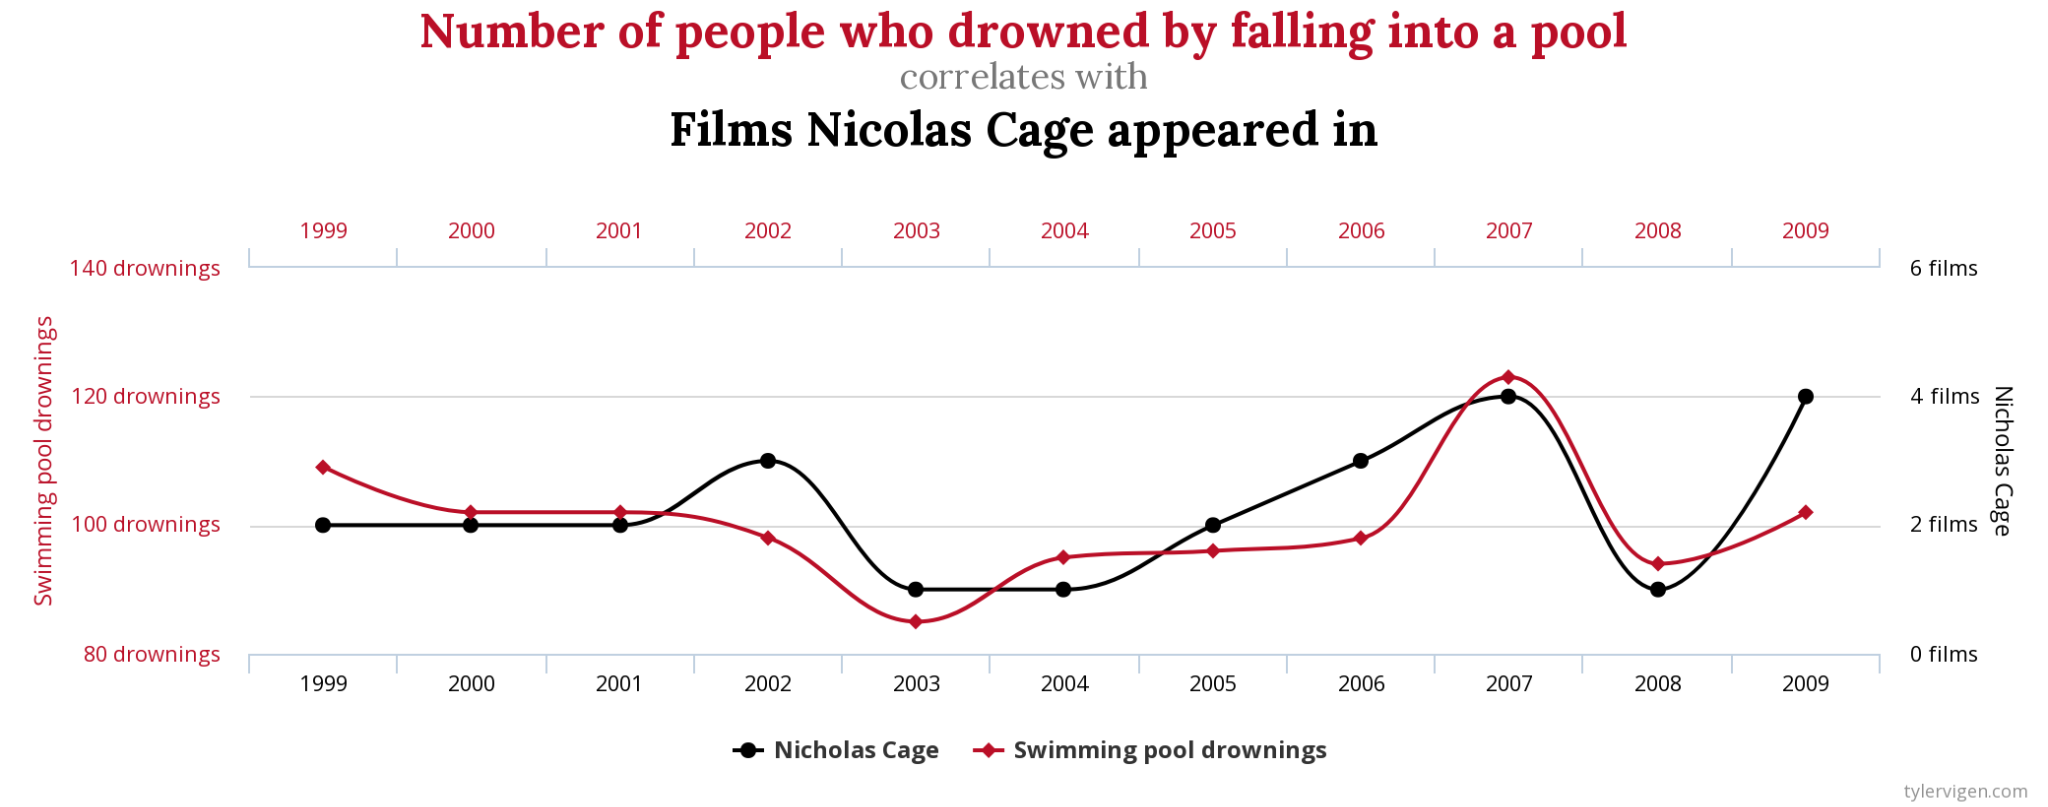 Chart depicting the strong correlations between “number of people who drowned by falling into a pool” and “films Nicholas Cage appeared in.”